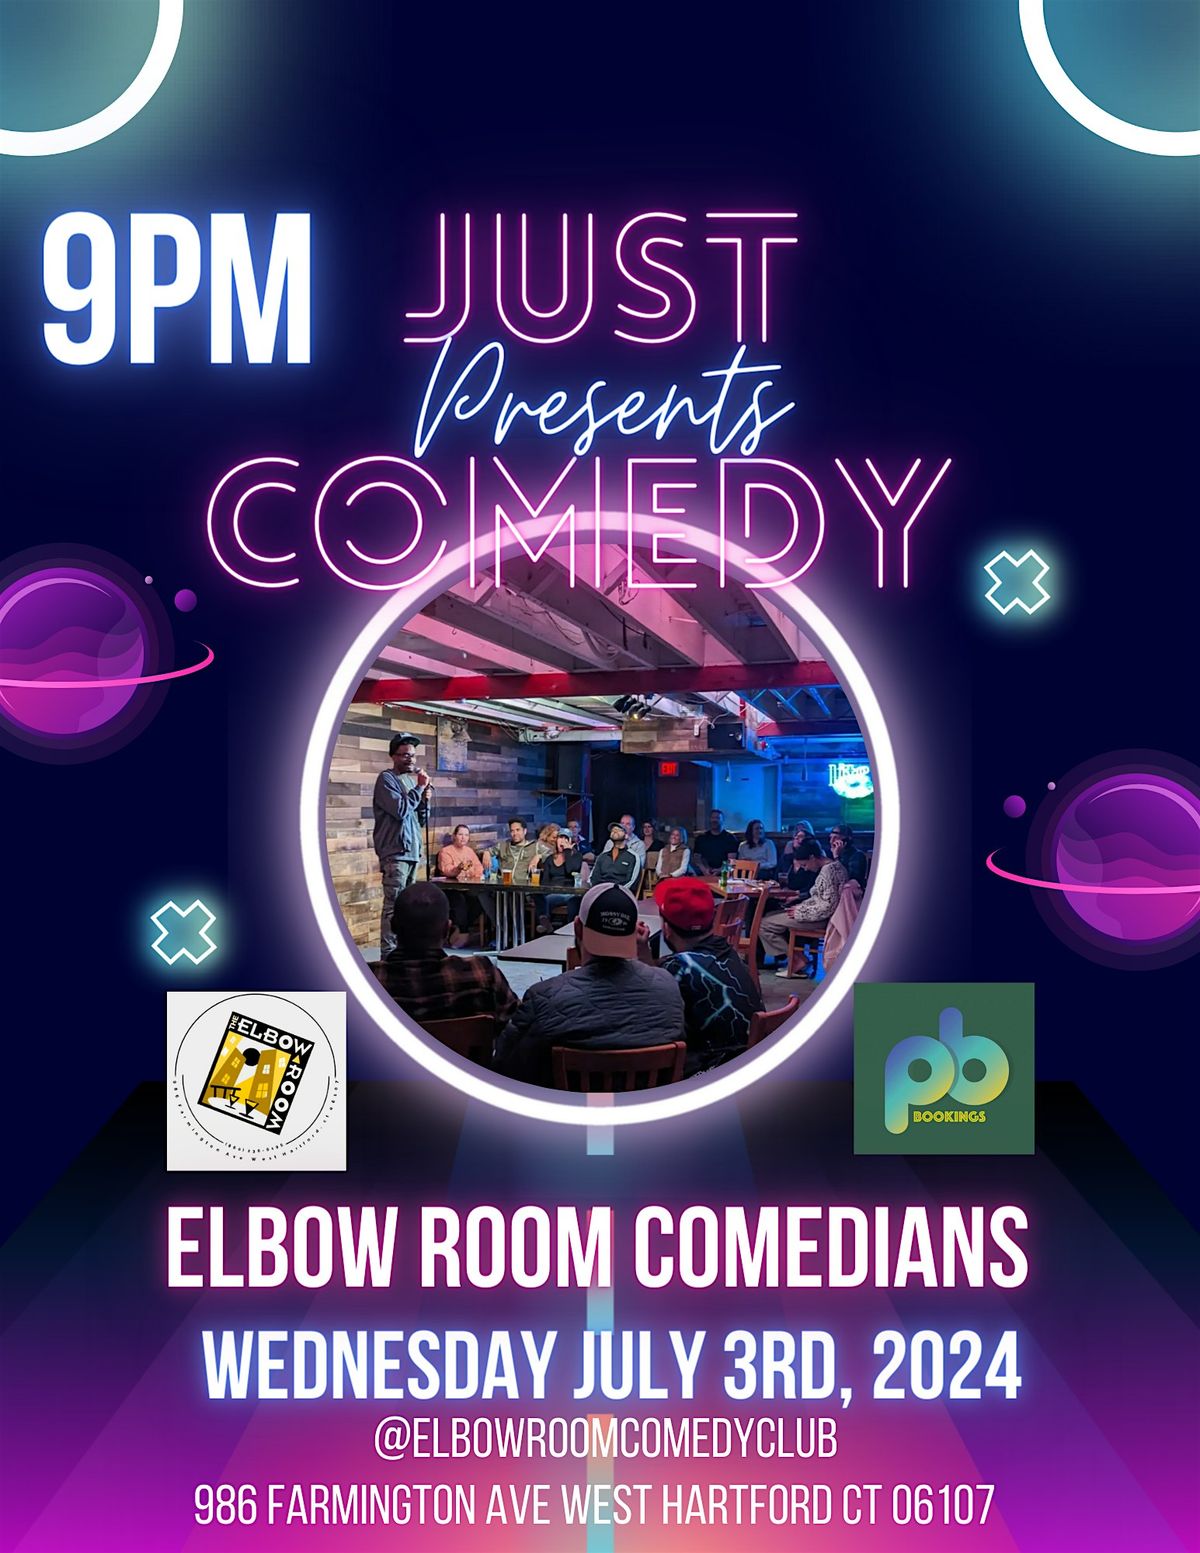 Just Comedy Presents: Pre 4th of July Comedy Show with Elbow Room Comedians